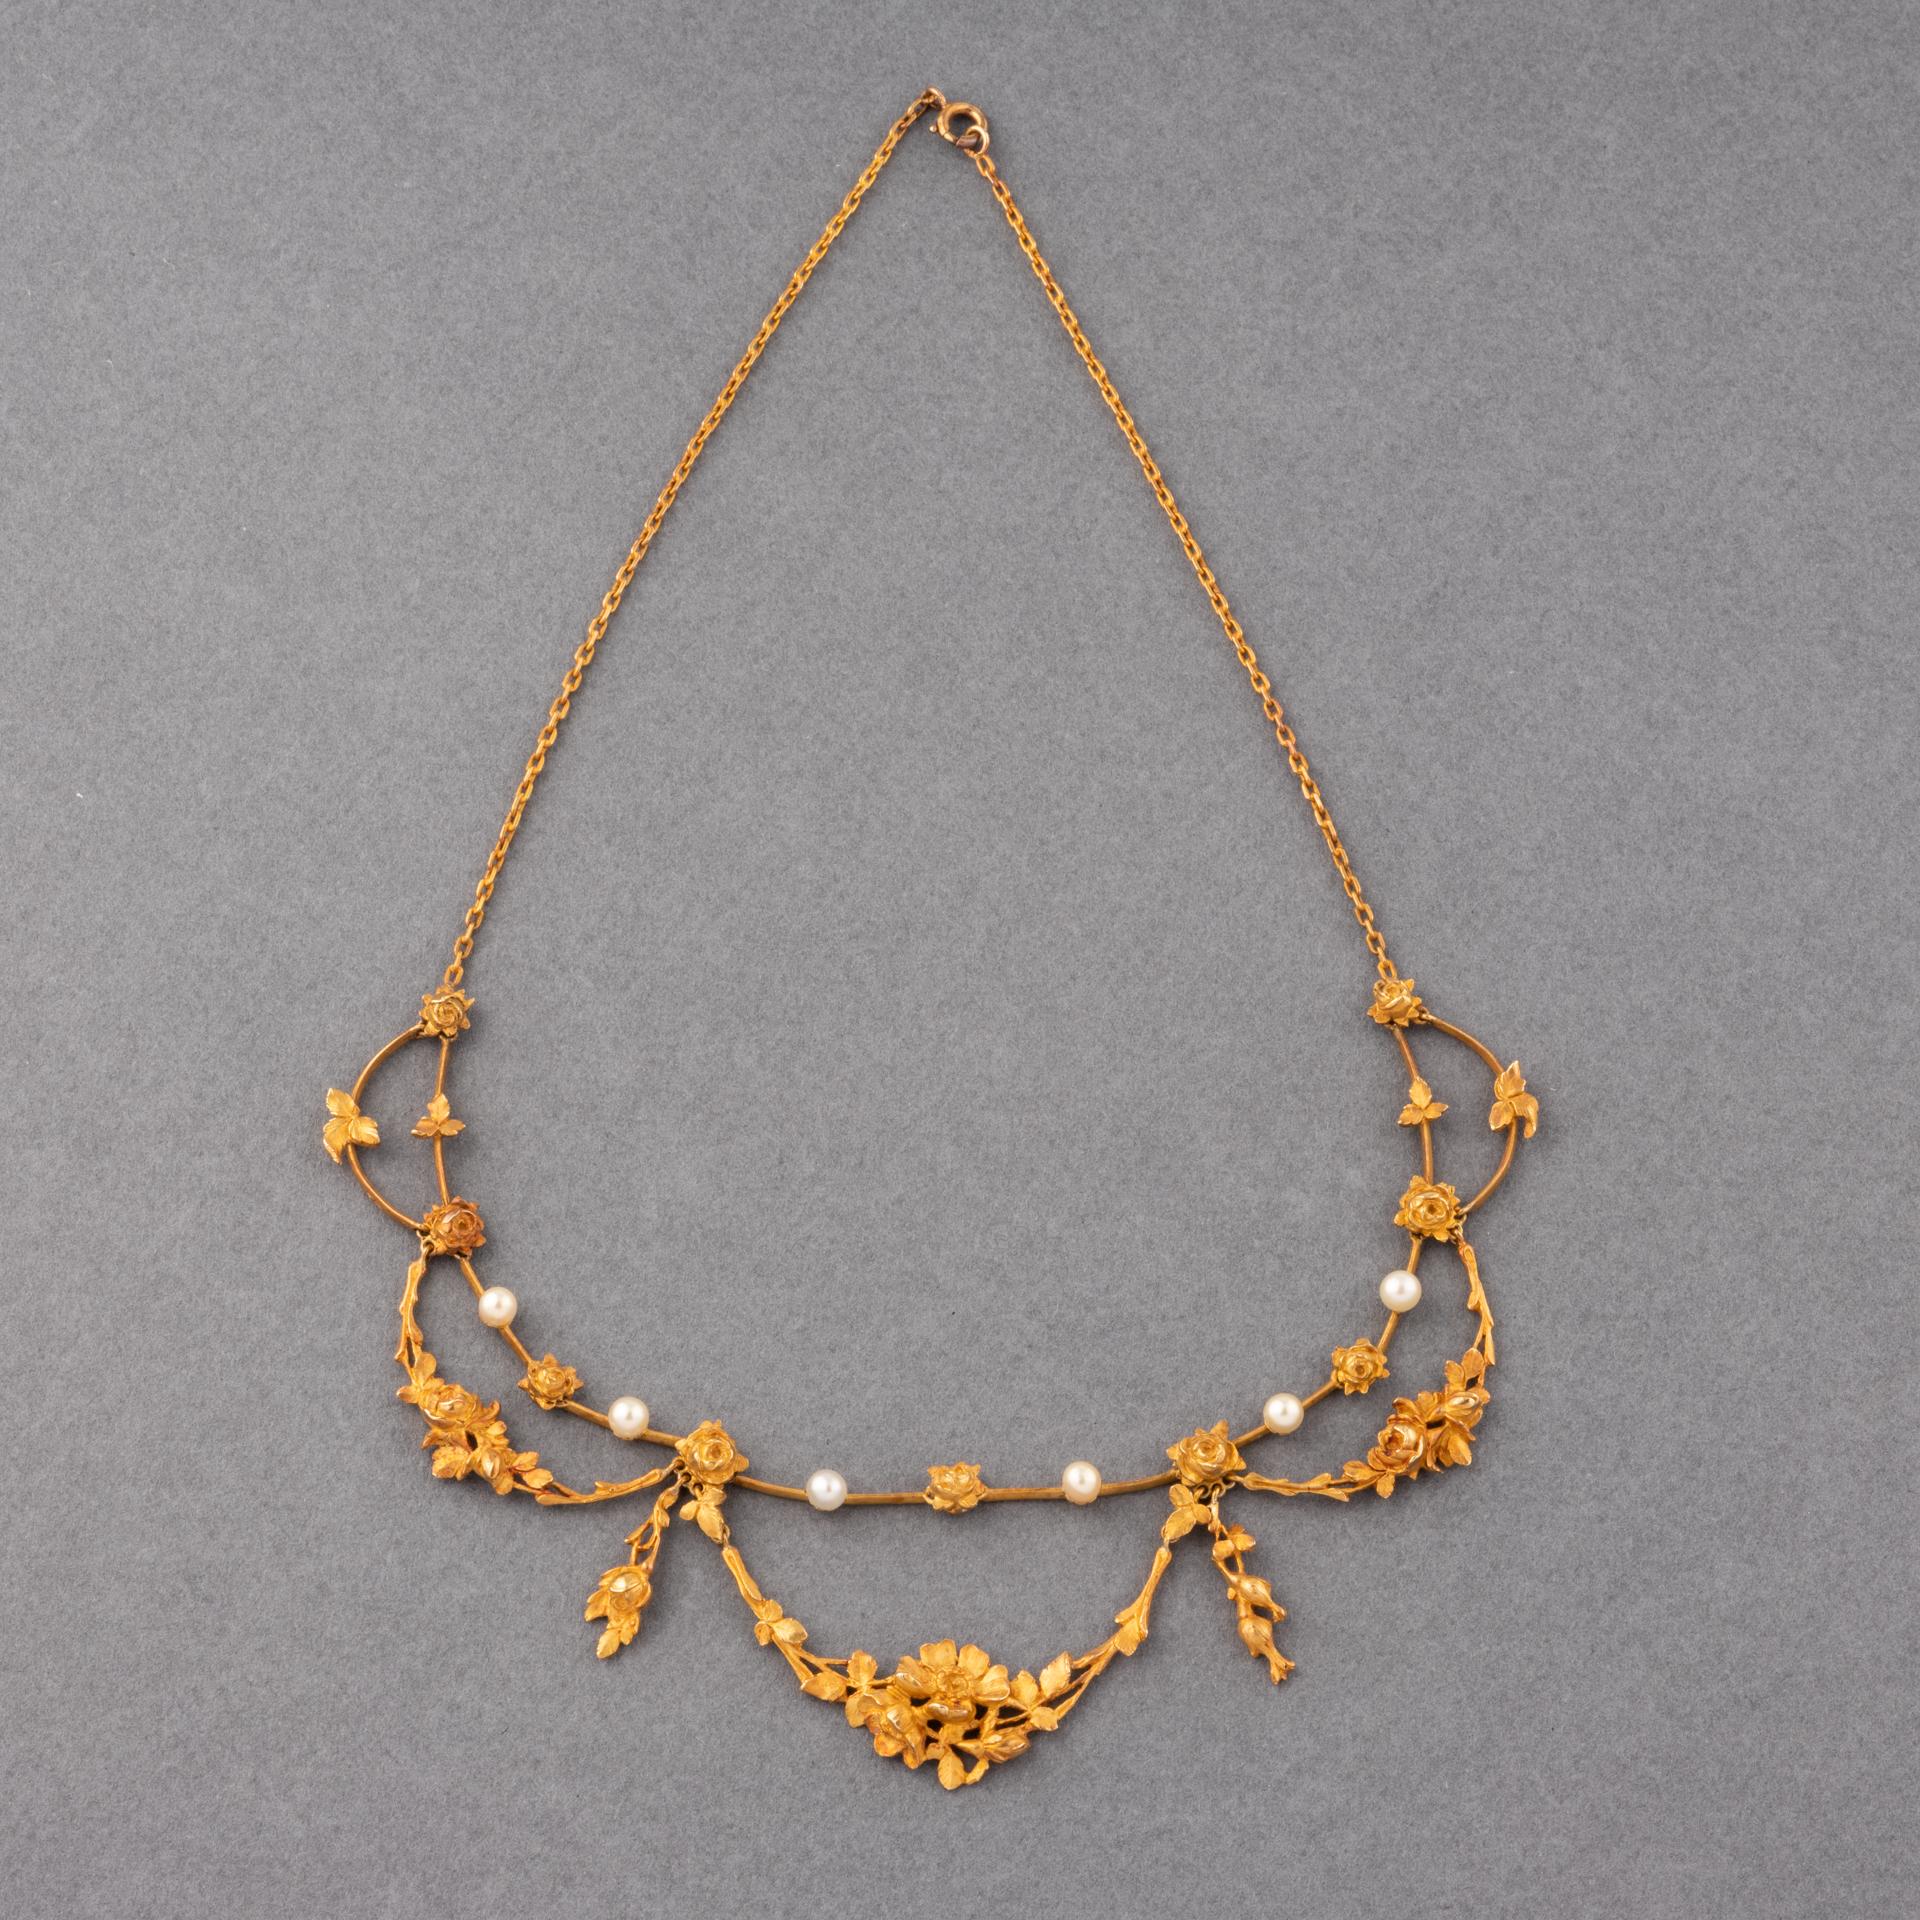 A lovely antique necklace, made in France circa 1900 by C Louchet PARIS.
Made in yellow gold 18k and set with natural pearls. French hallmarks for gold 18K.
The length is 41 cm or 16.4 inches.
Weight: 29.80  grams